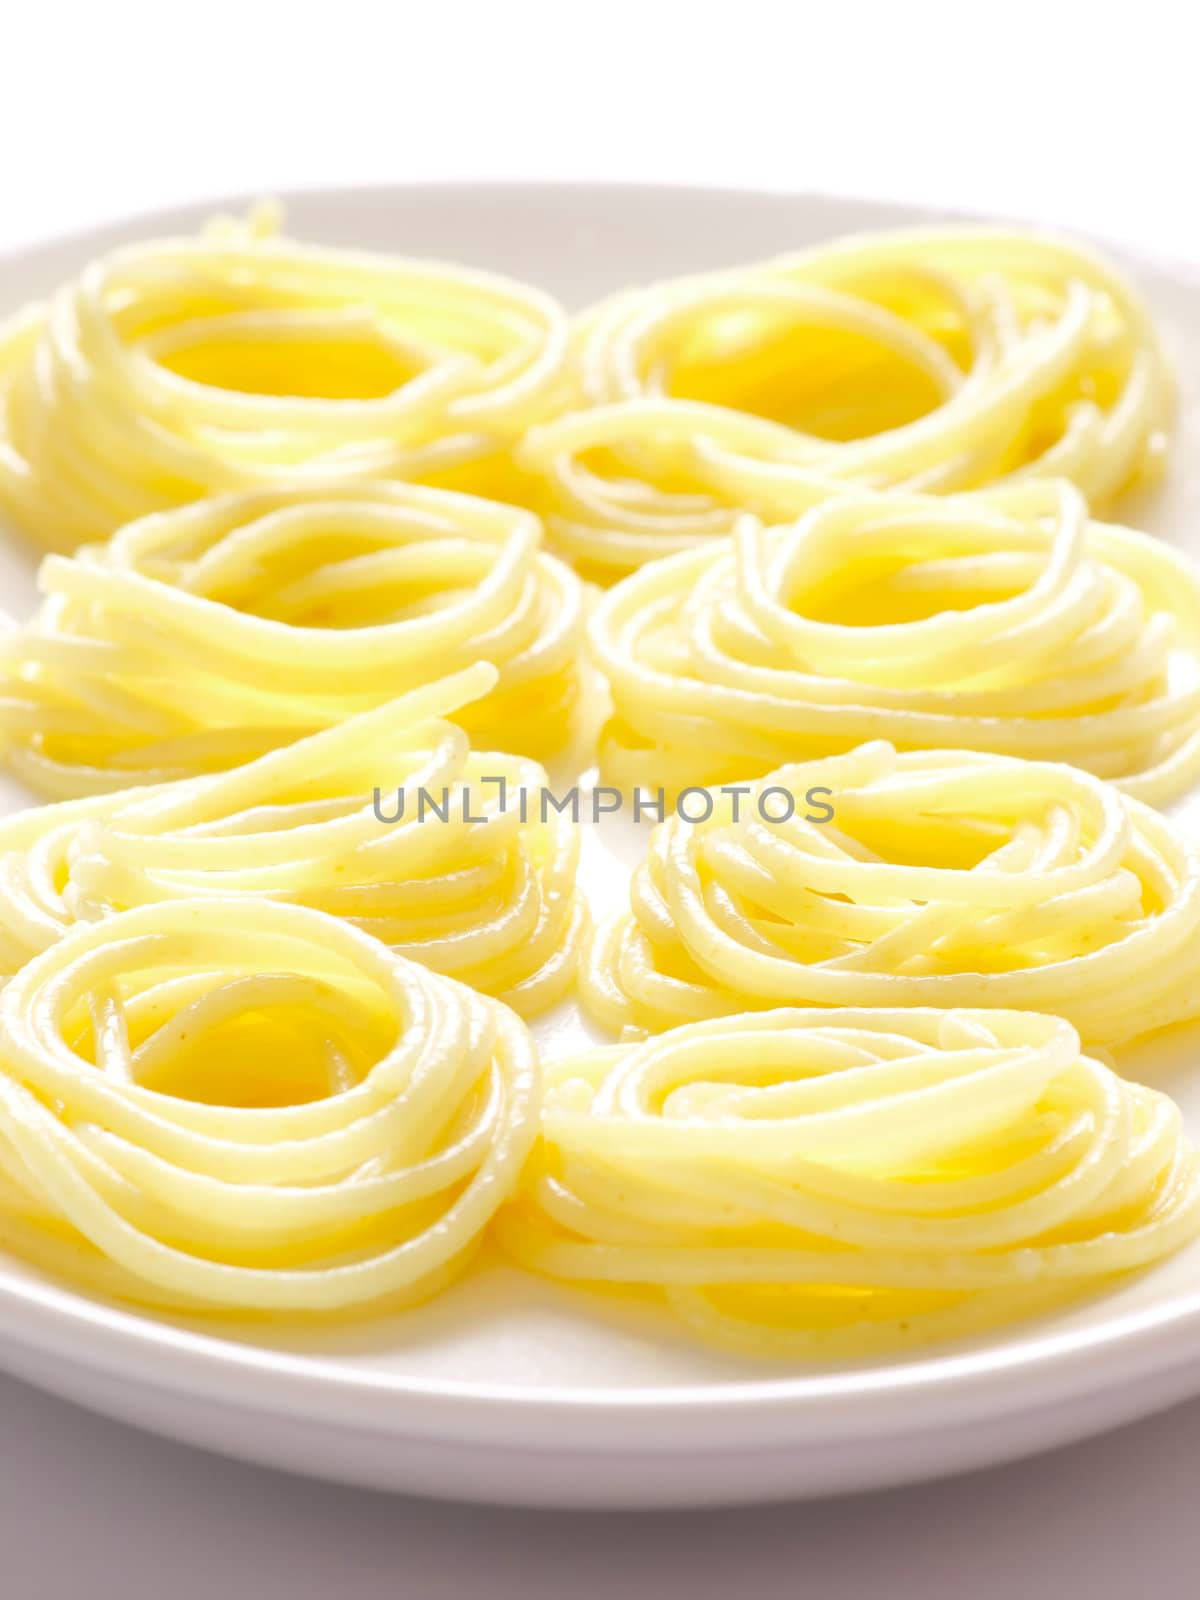 close up of a plate of spaghetti noodles